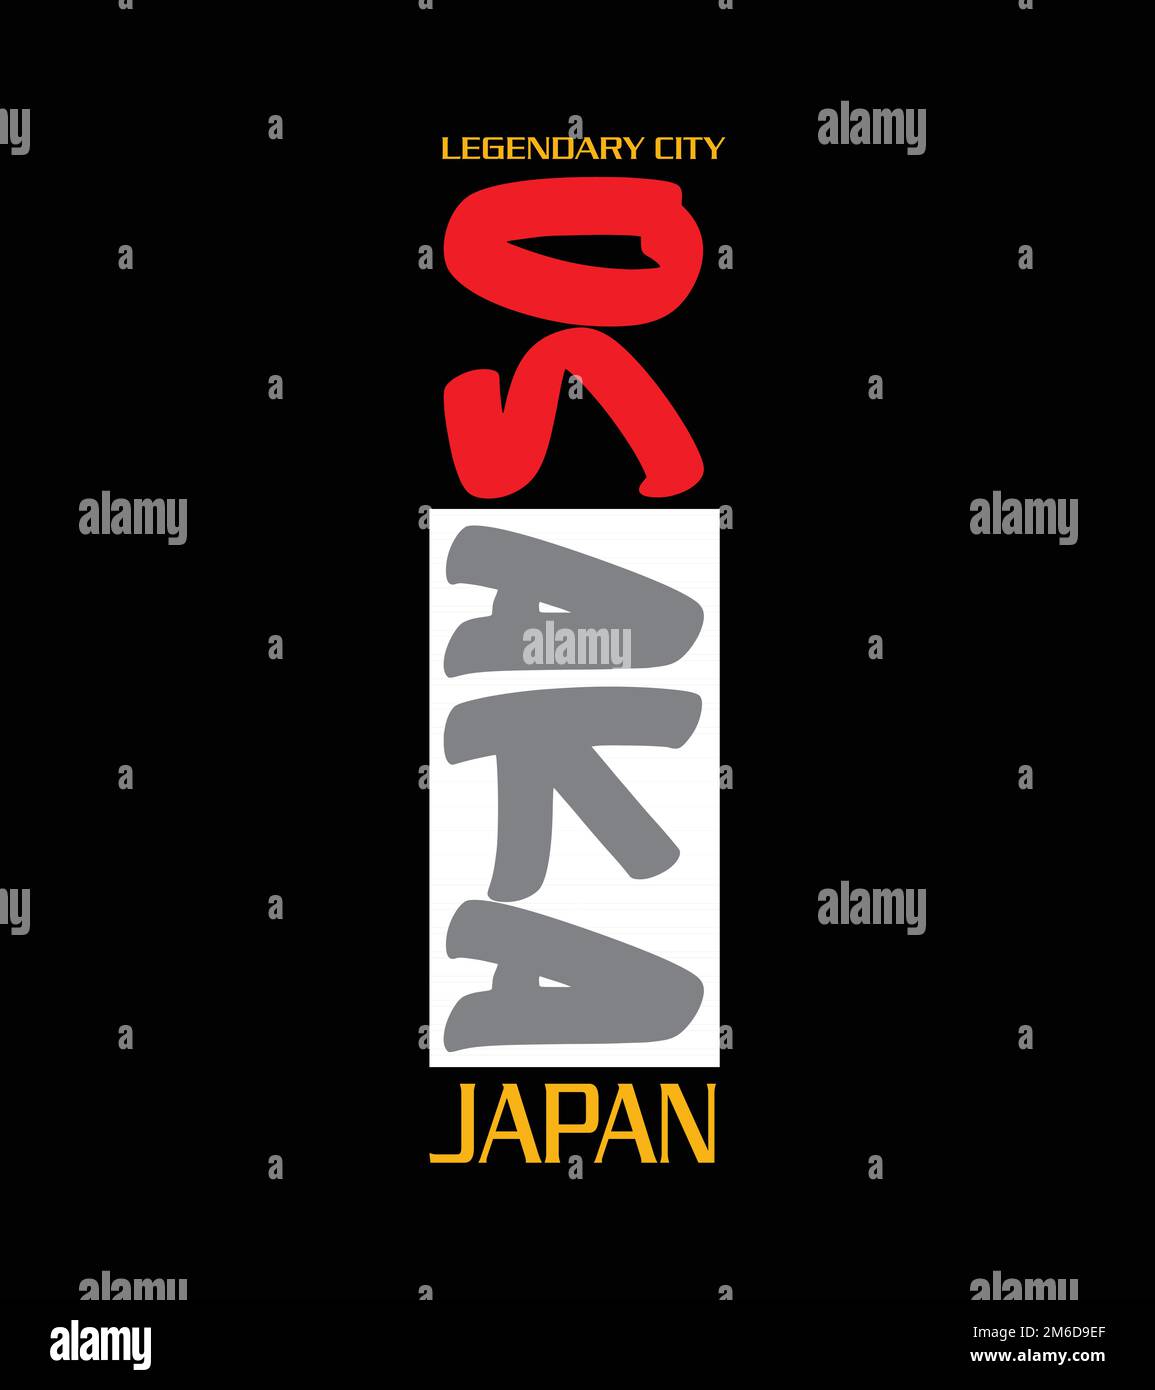 Osaka Japan Legendary City Style Typography is Very Unique For T-Shirt Printing Stock Vector